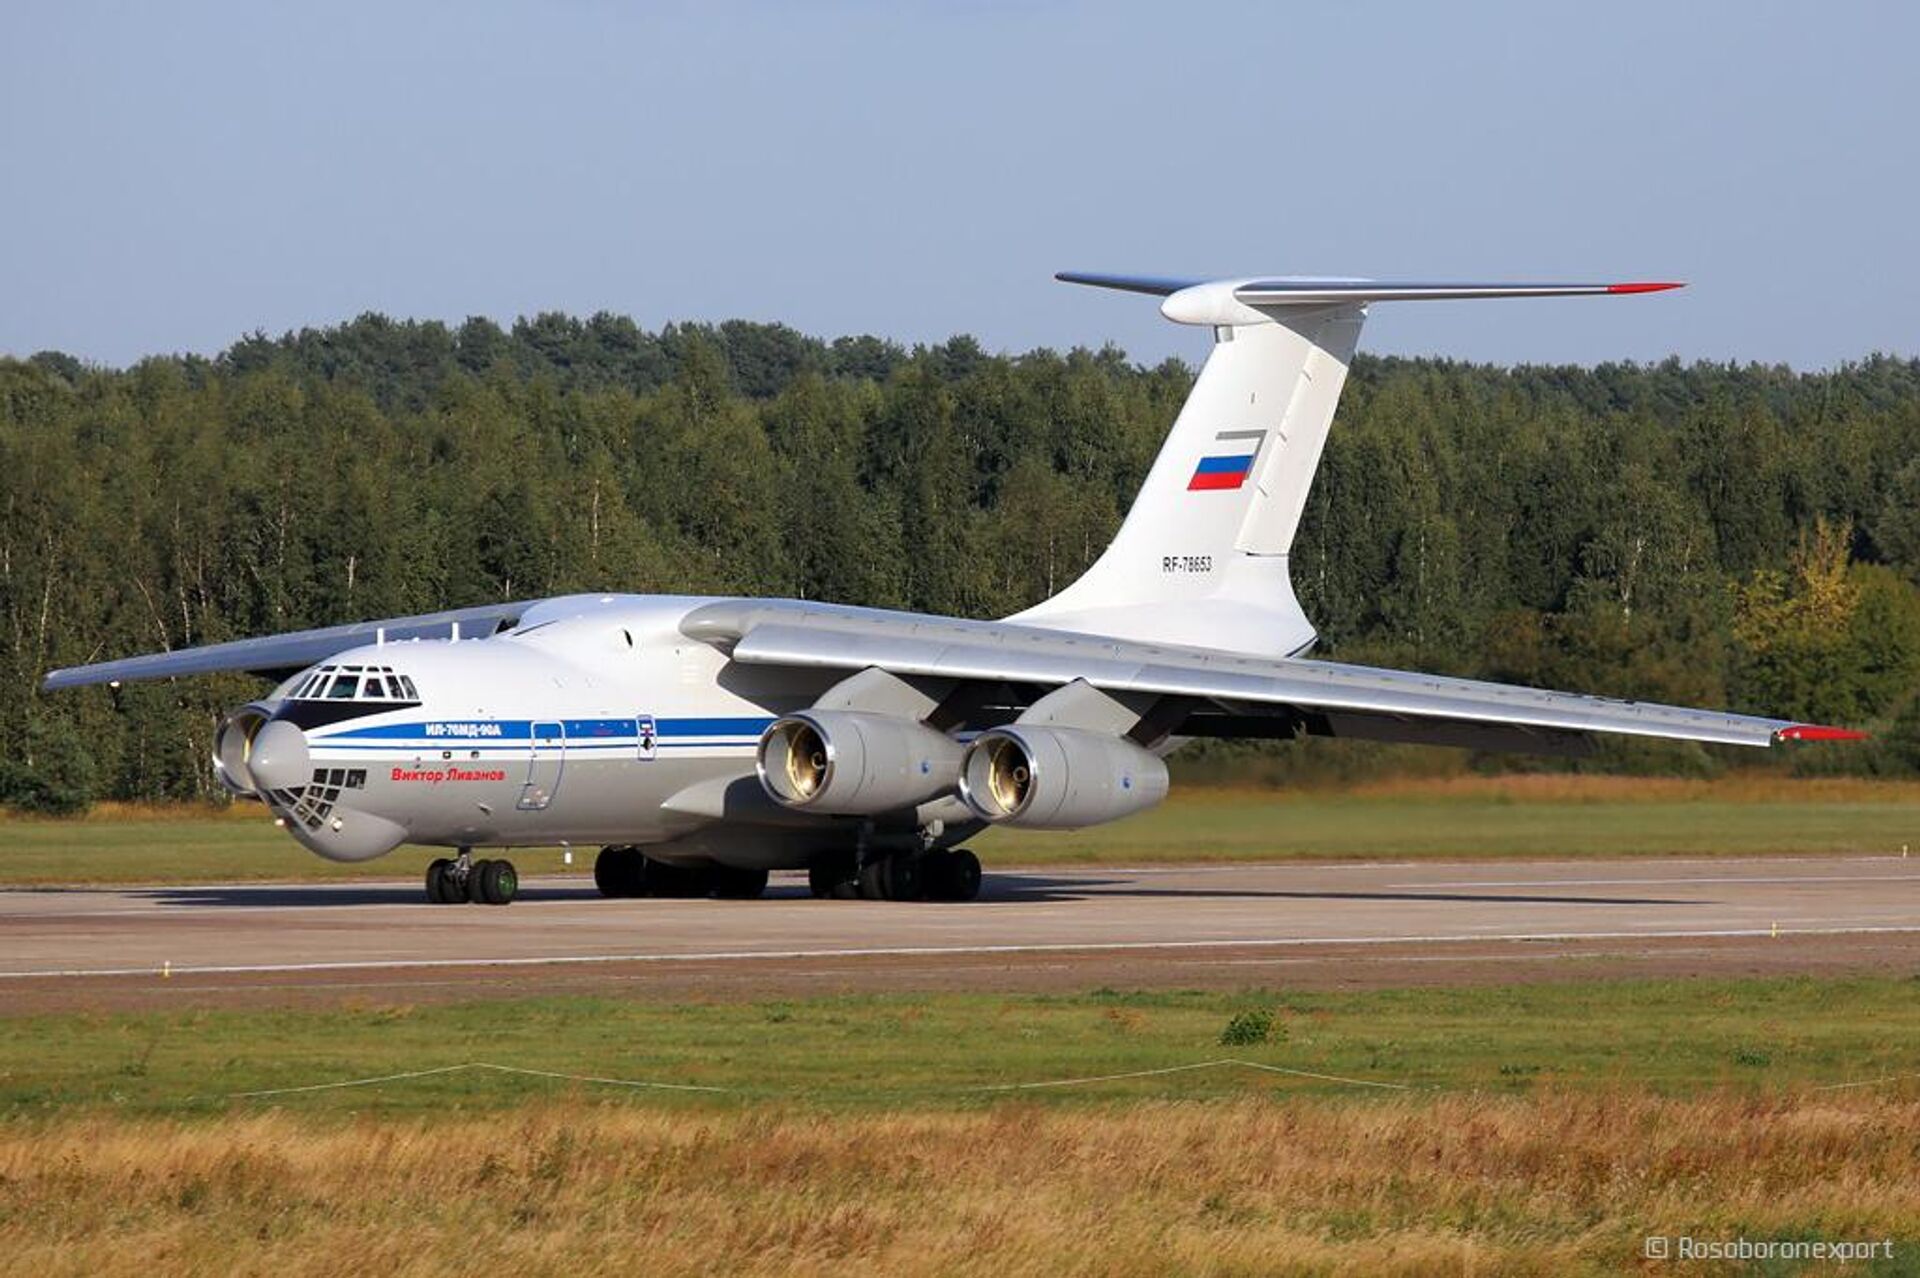 Ilyushin Il-76MD-90A at an airfield. The aircraft is the latest modernization of the workhorse Il-76 strategic airlifter. - Sputnik International, 1920, 13.11.2023